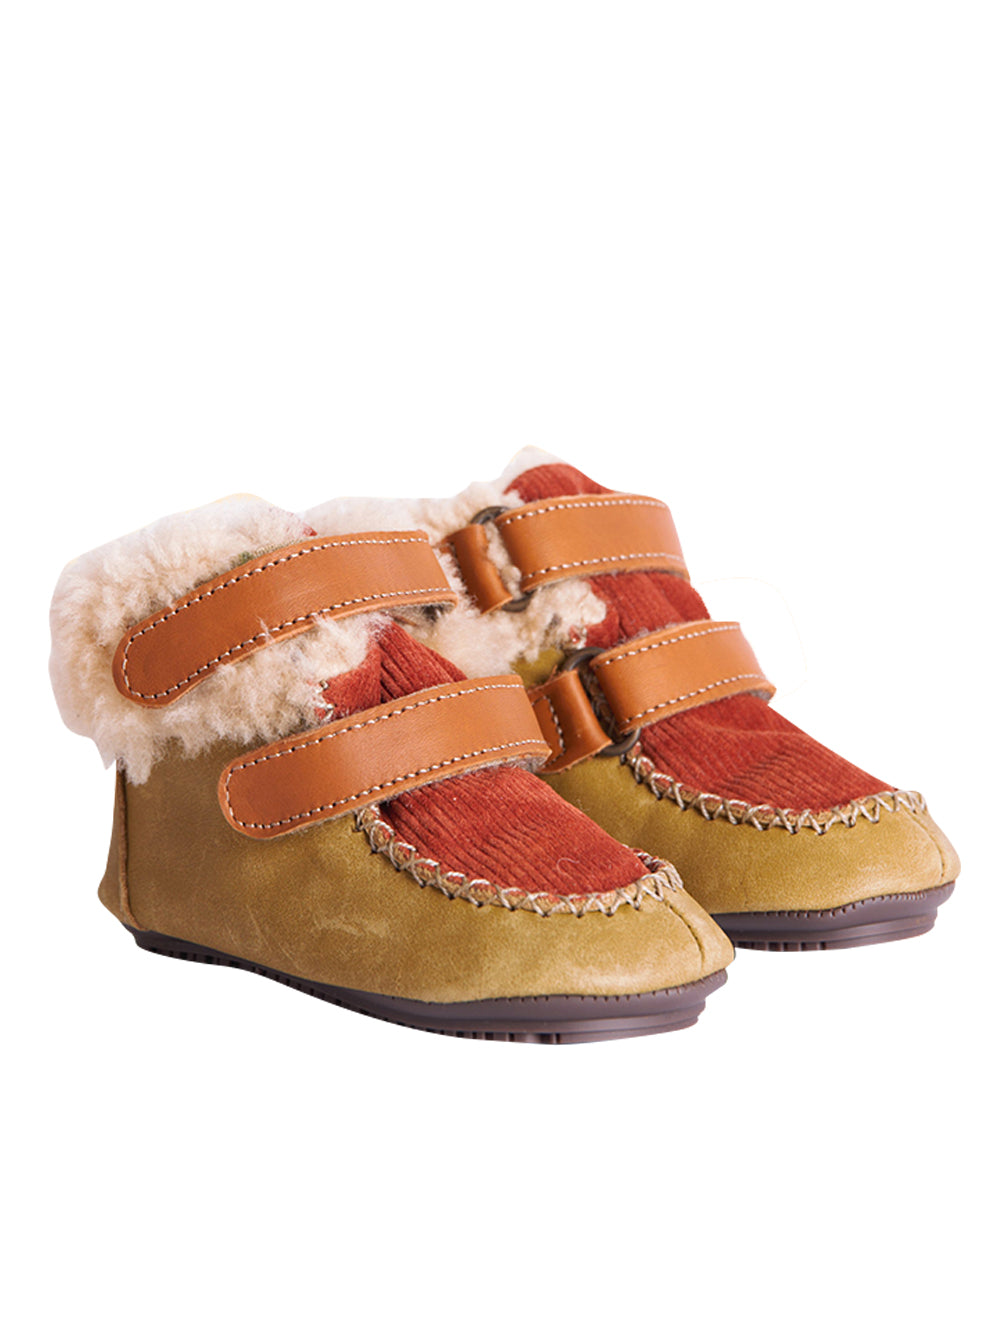 Colorblock Sheep  Baby Boots